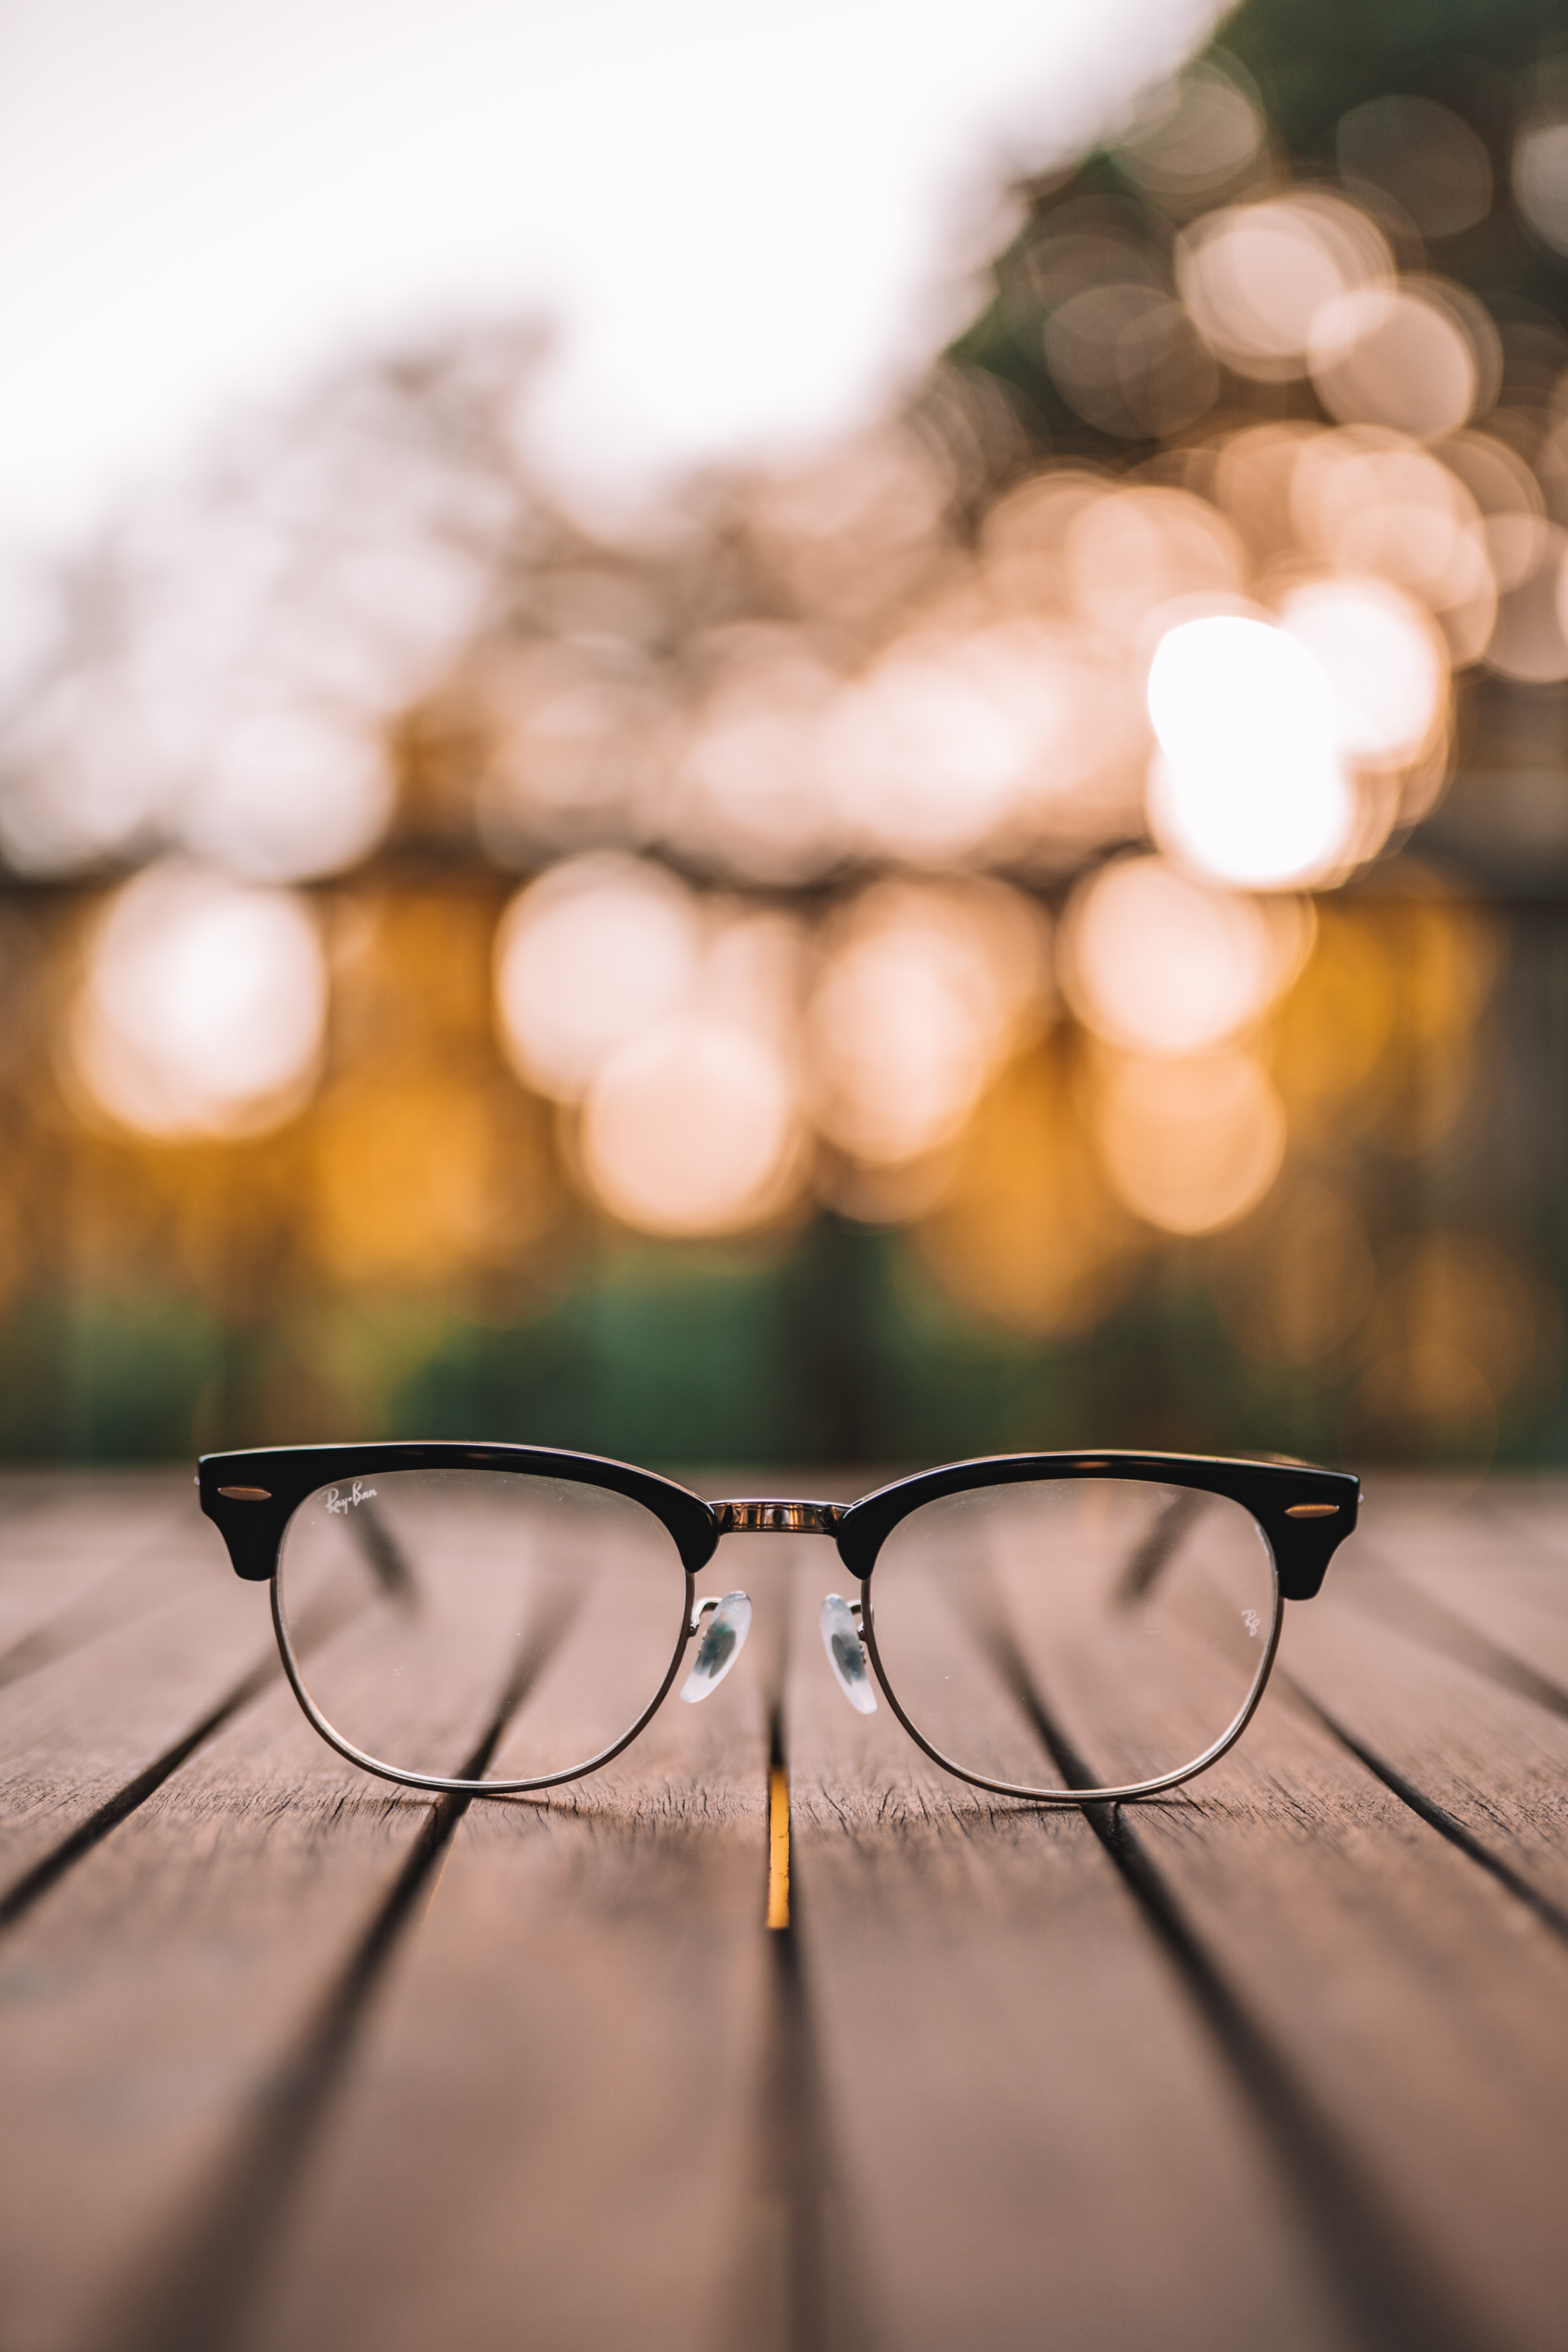 miscellanea, miscellaneous, wood, wooden, blur, smooth, lenses, planks, board, glasses, spectacles HD wallpaper